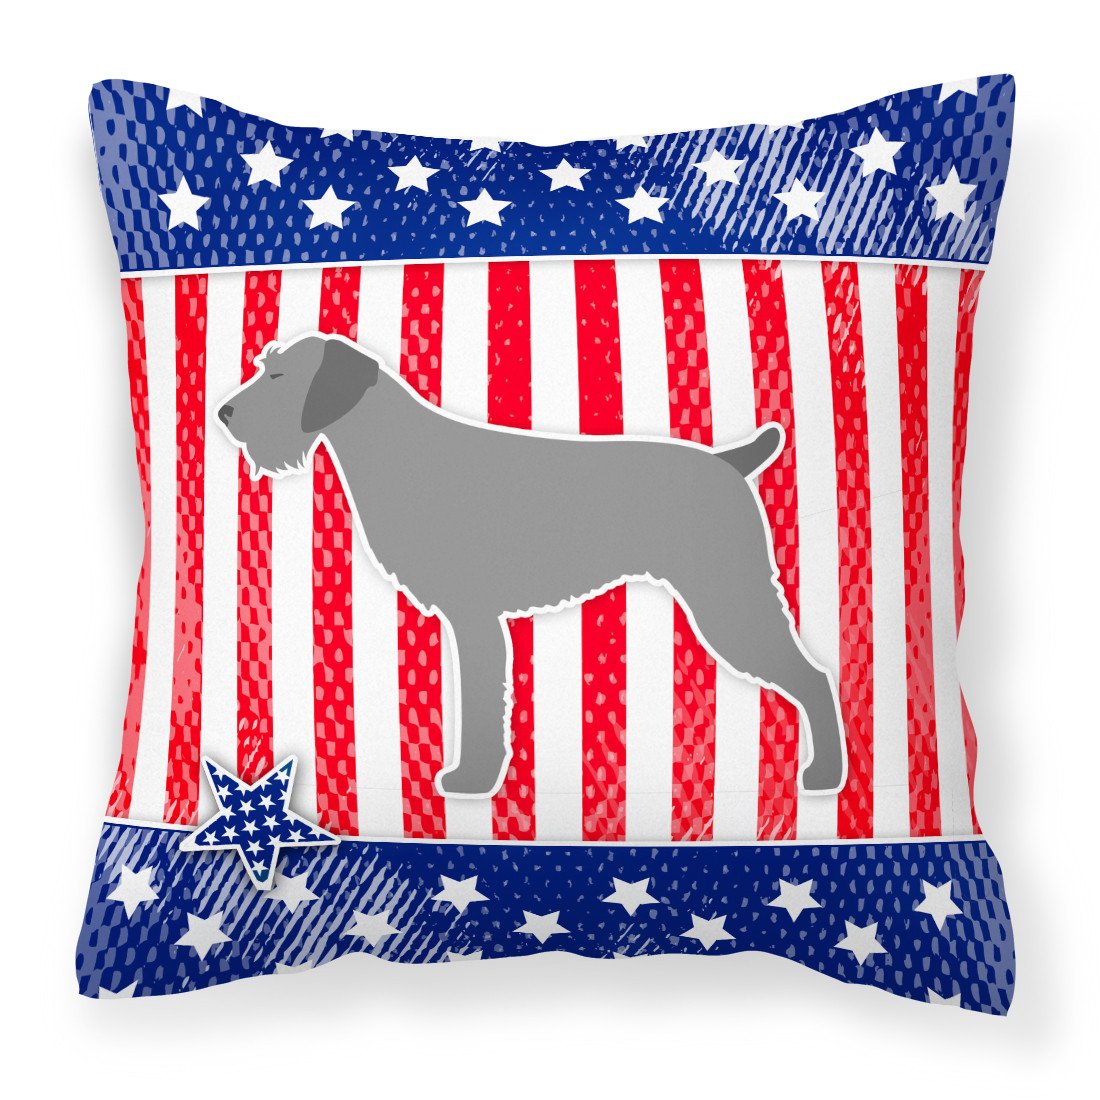 USA Patriotic German Wirehaired Pointer Fabric Decorative Pillow BB3311PW1818 by Caroline's Treasures